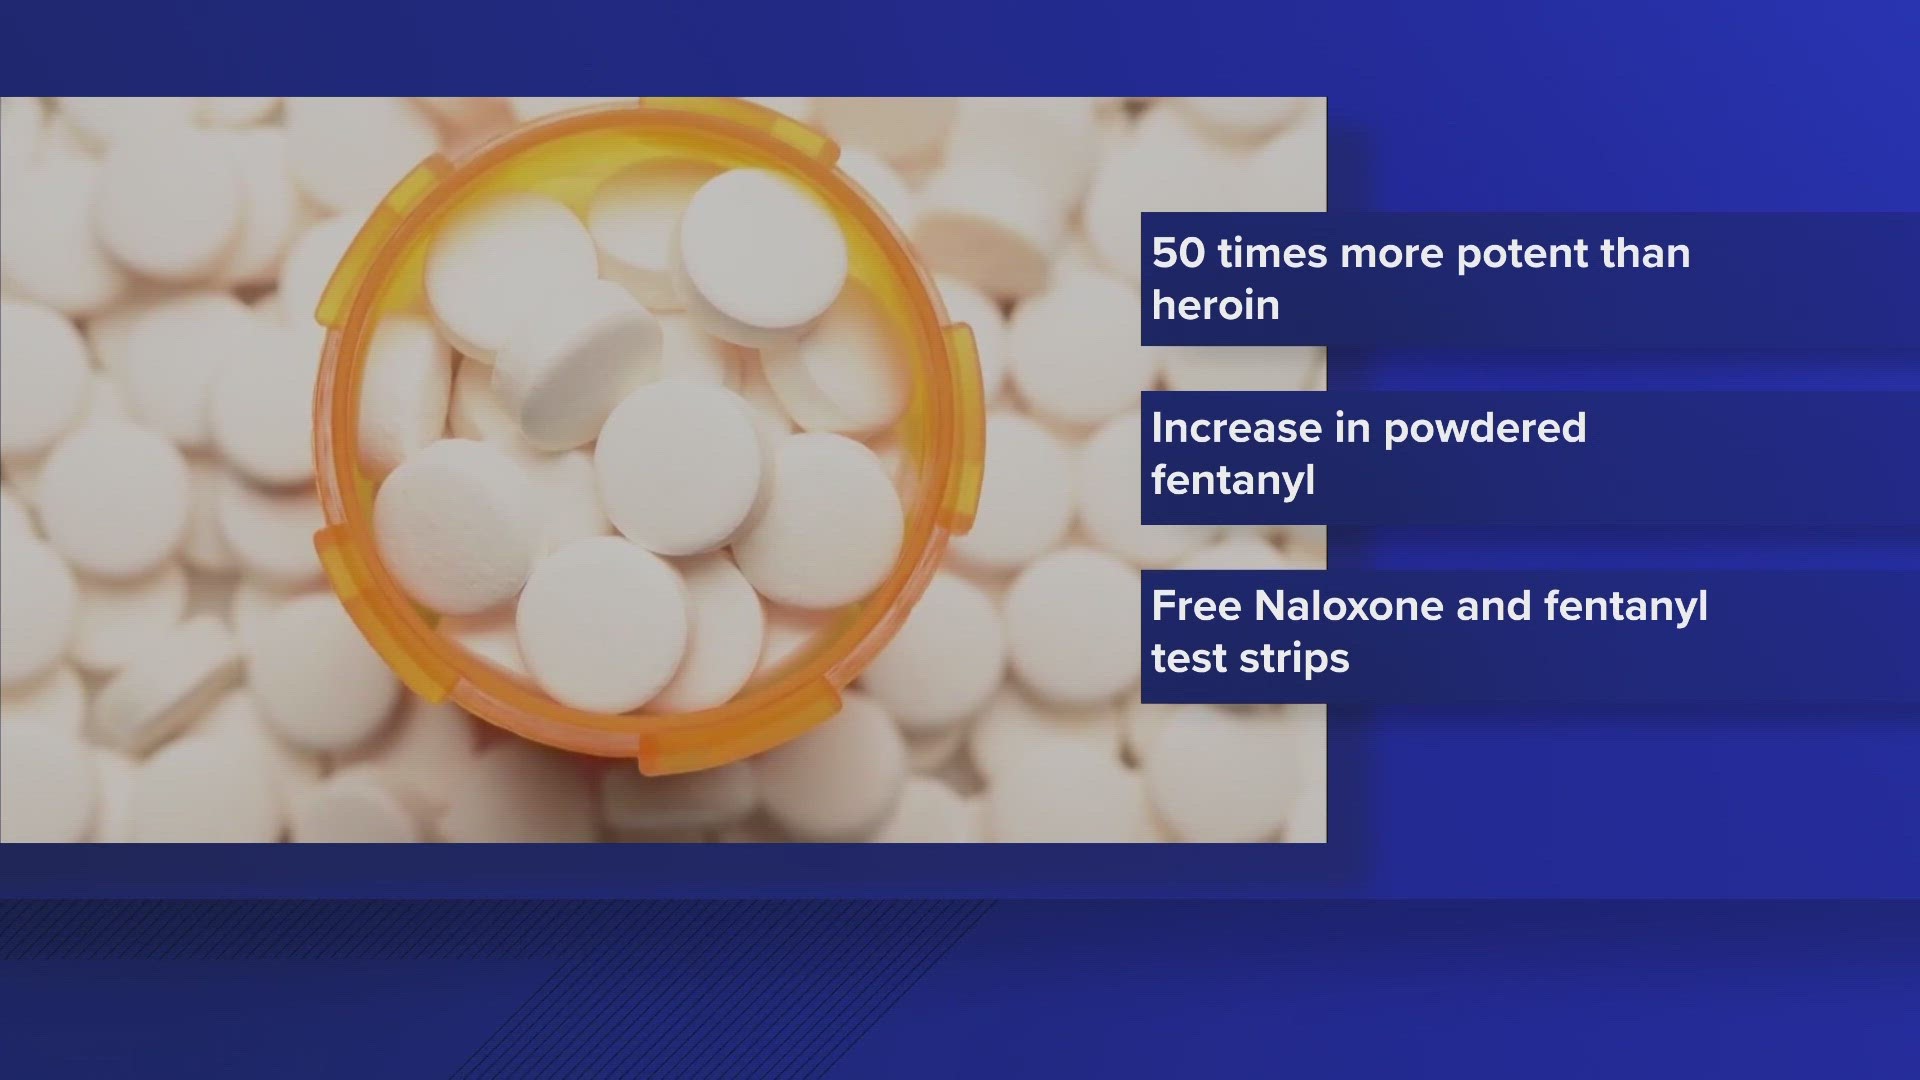 The Denver Department of Public Health and Environment encouraged Denver residents to be cautious as the number of fentanyl-related deaths rises.